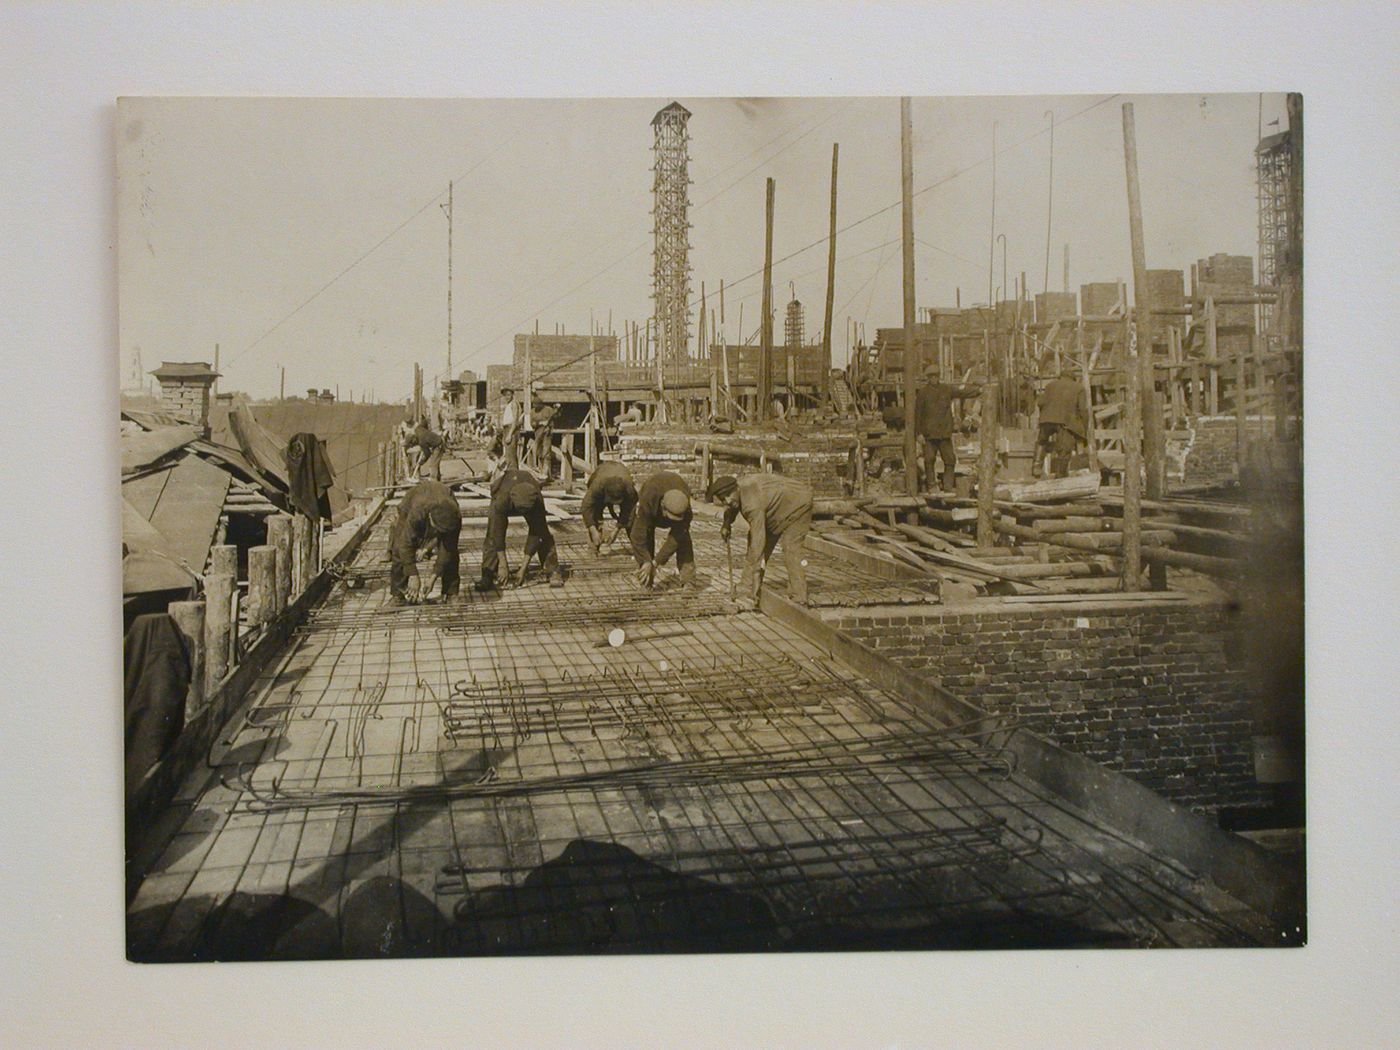 View of the Building of Industry construction site showing the installation of metal rod reinforcement, Sverdlovsk, Soviet Union (now Ekaterinburg, Russia)